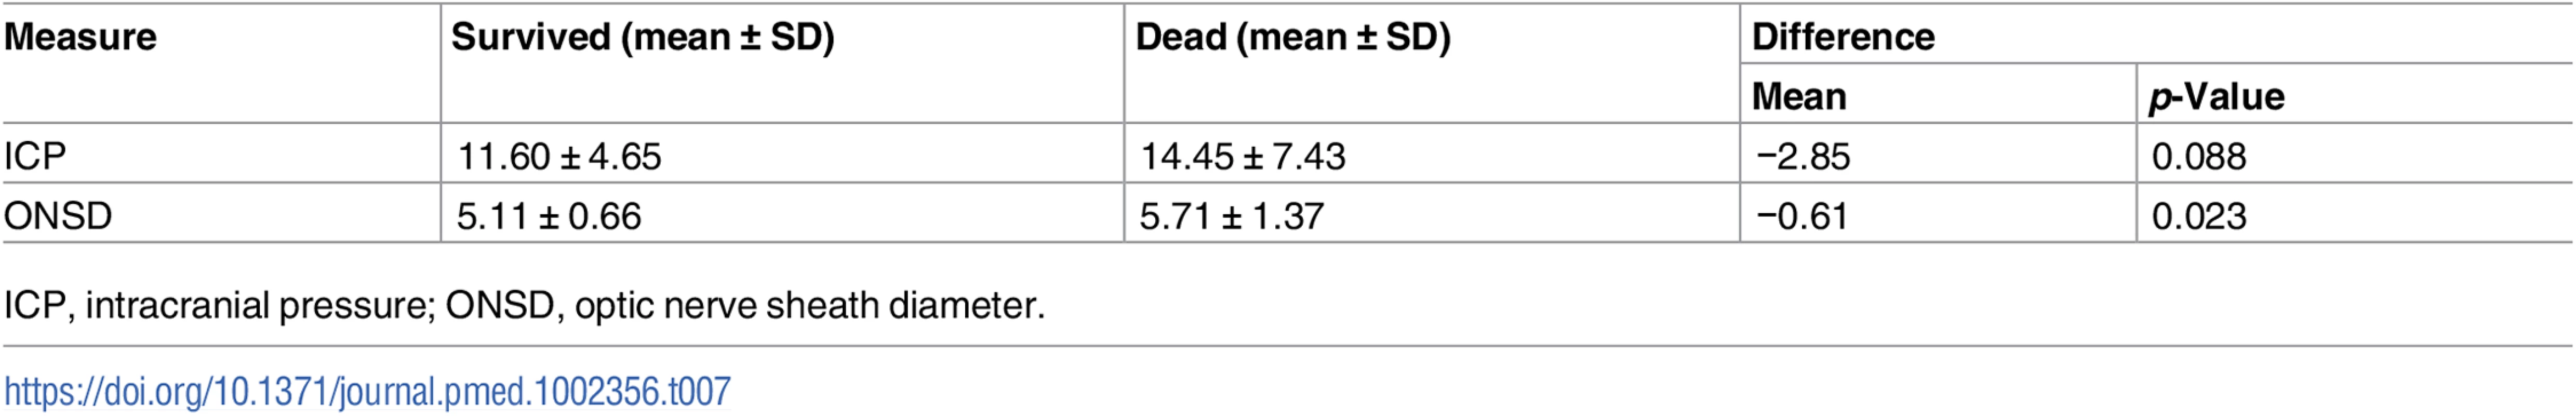 Summary table describing the association between ICP, ONSD, and mortality.